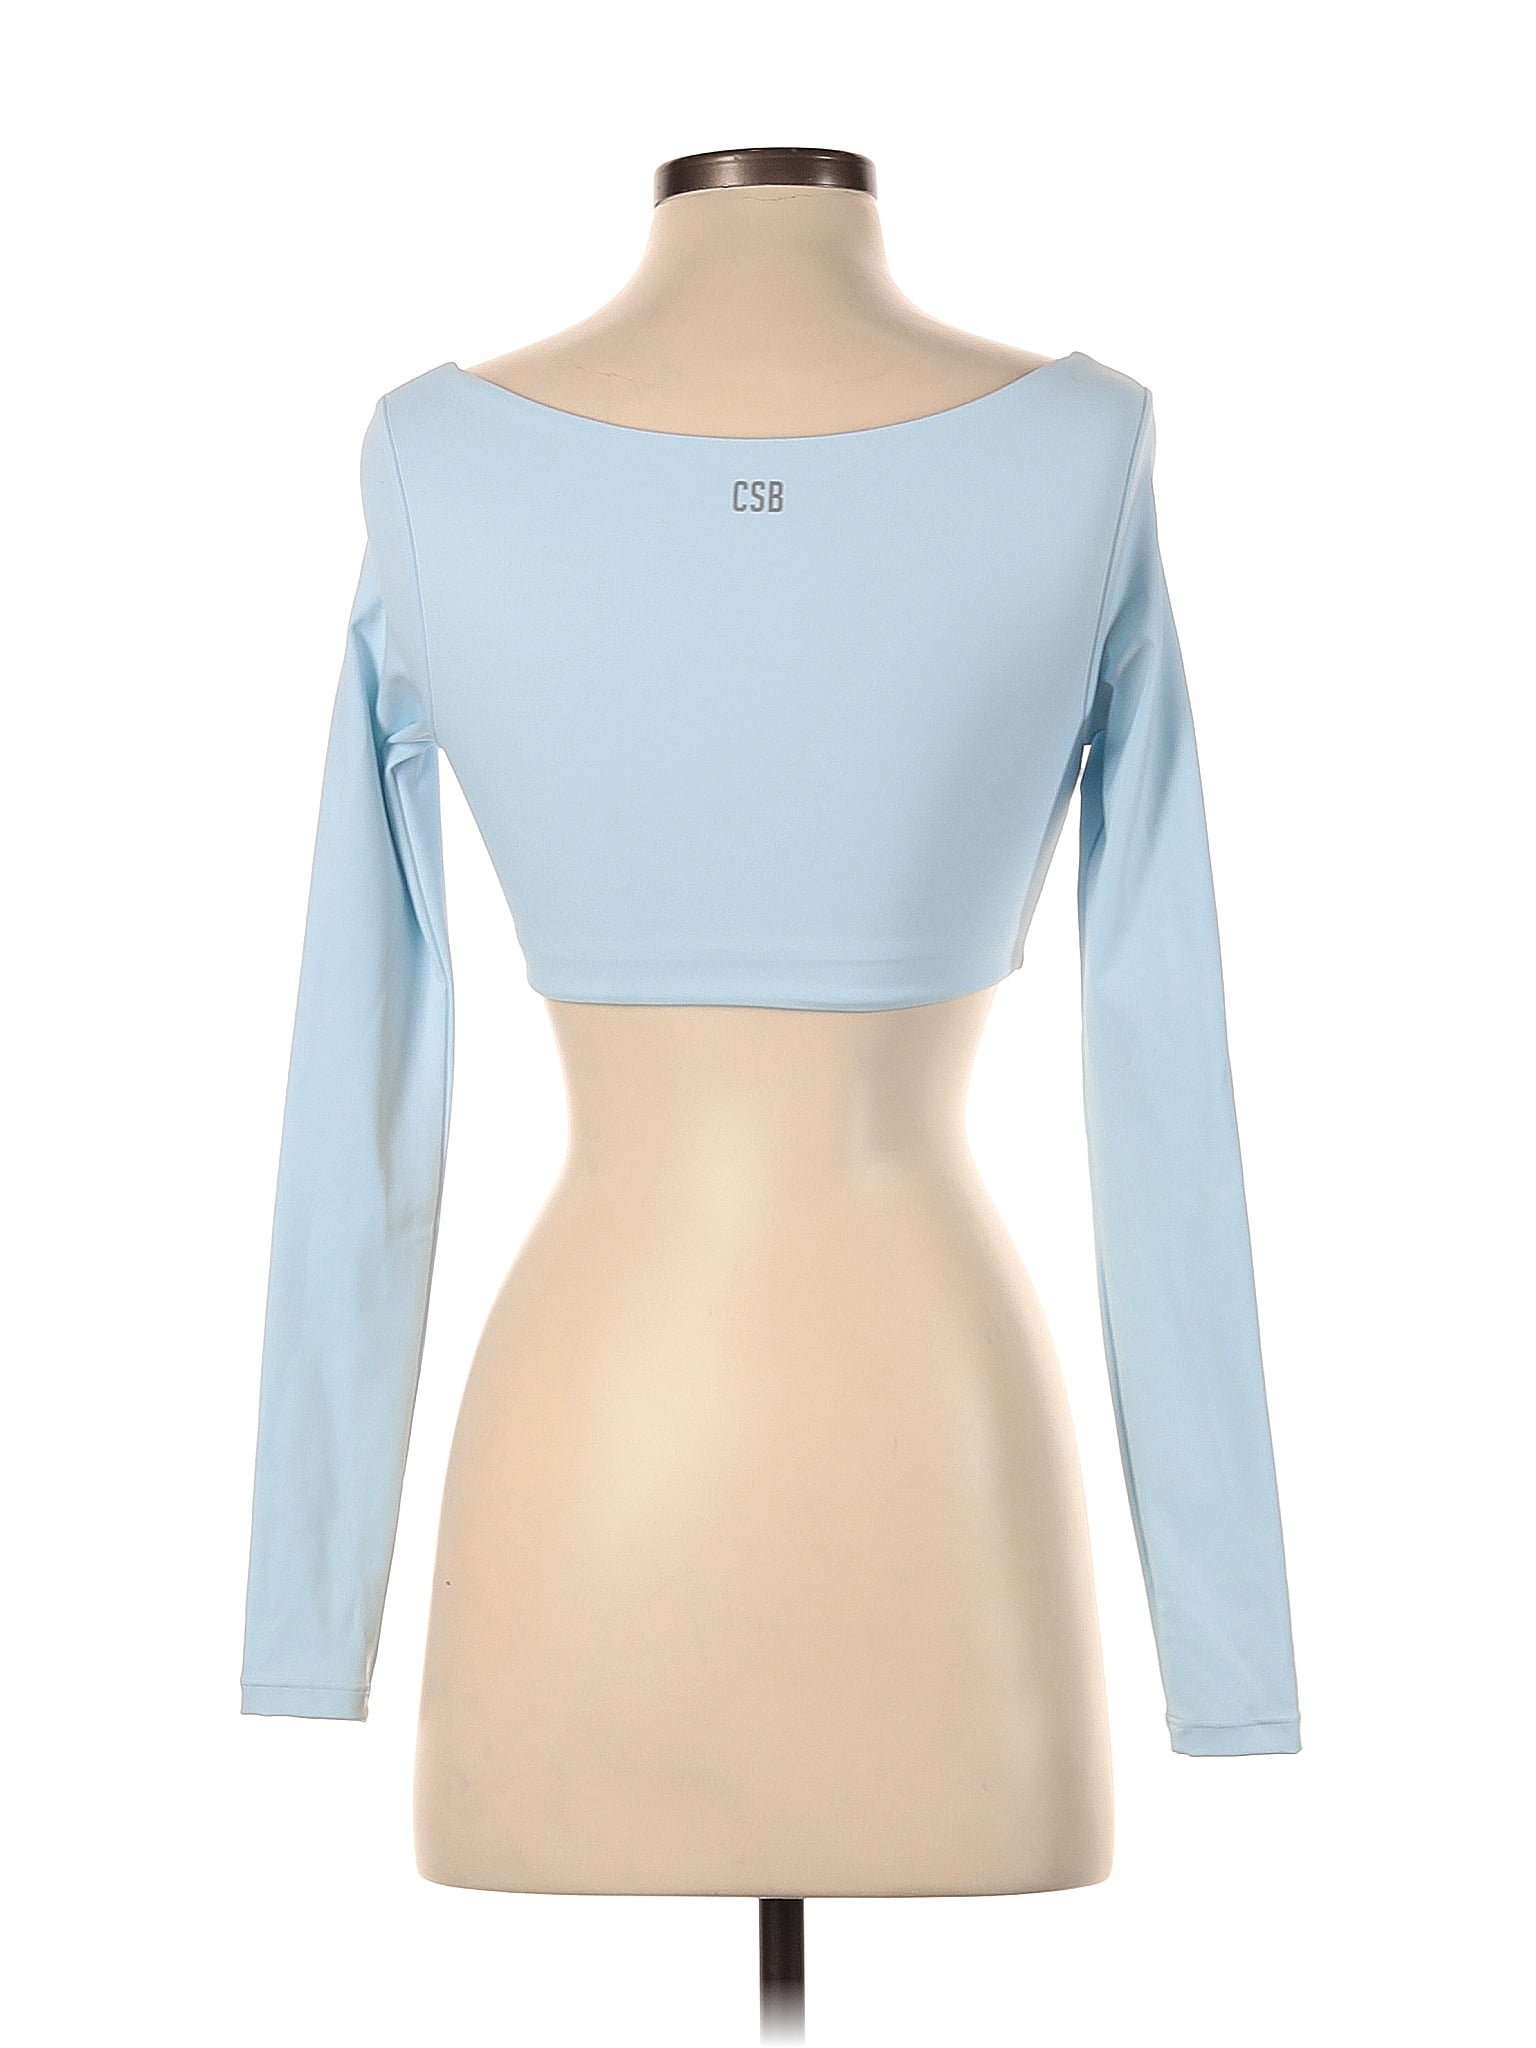 CSB Women's Activewear On Sale Up To 90% Off Retail